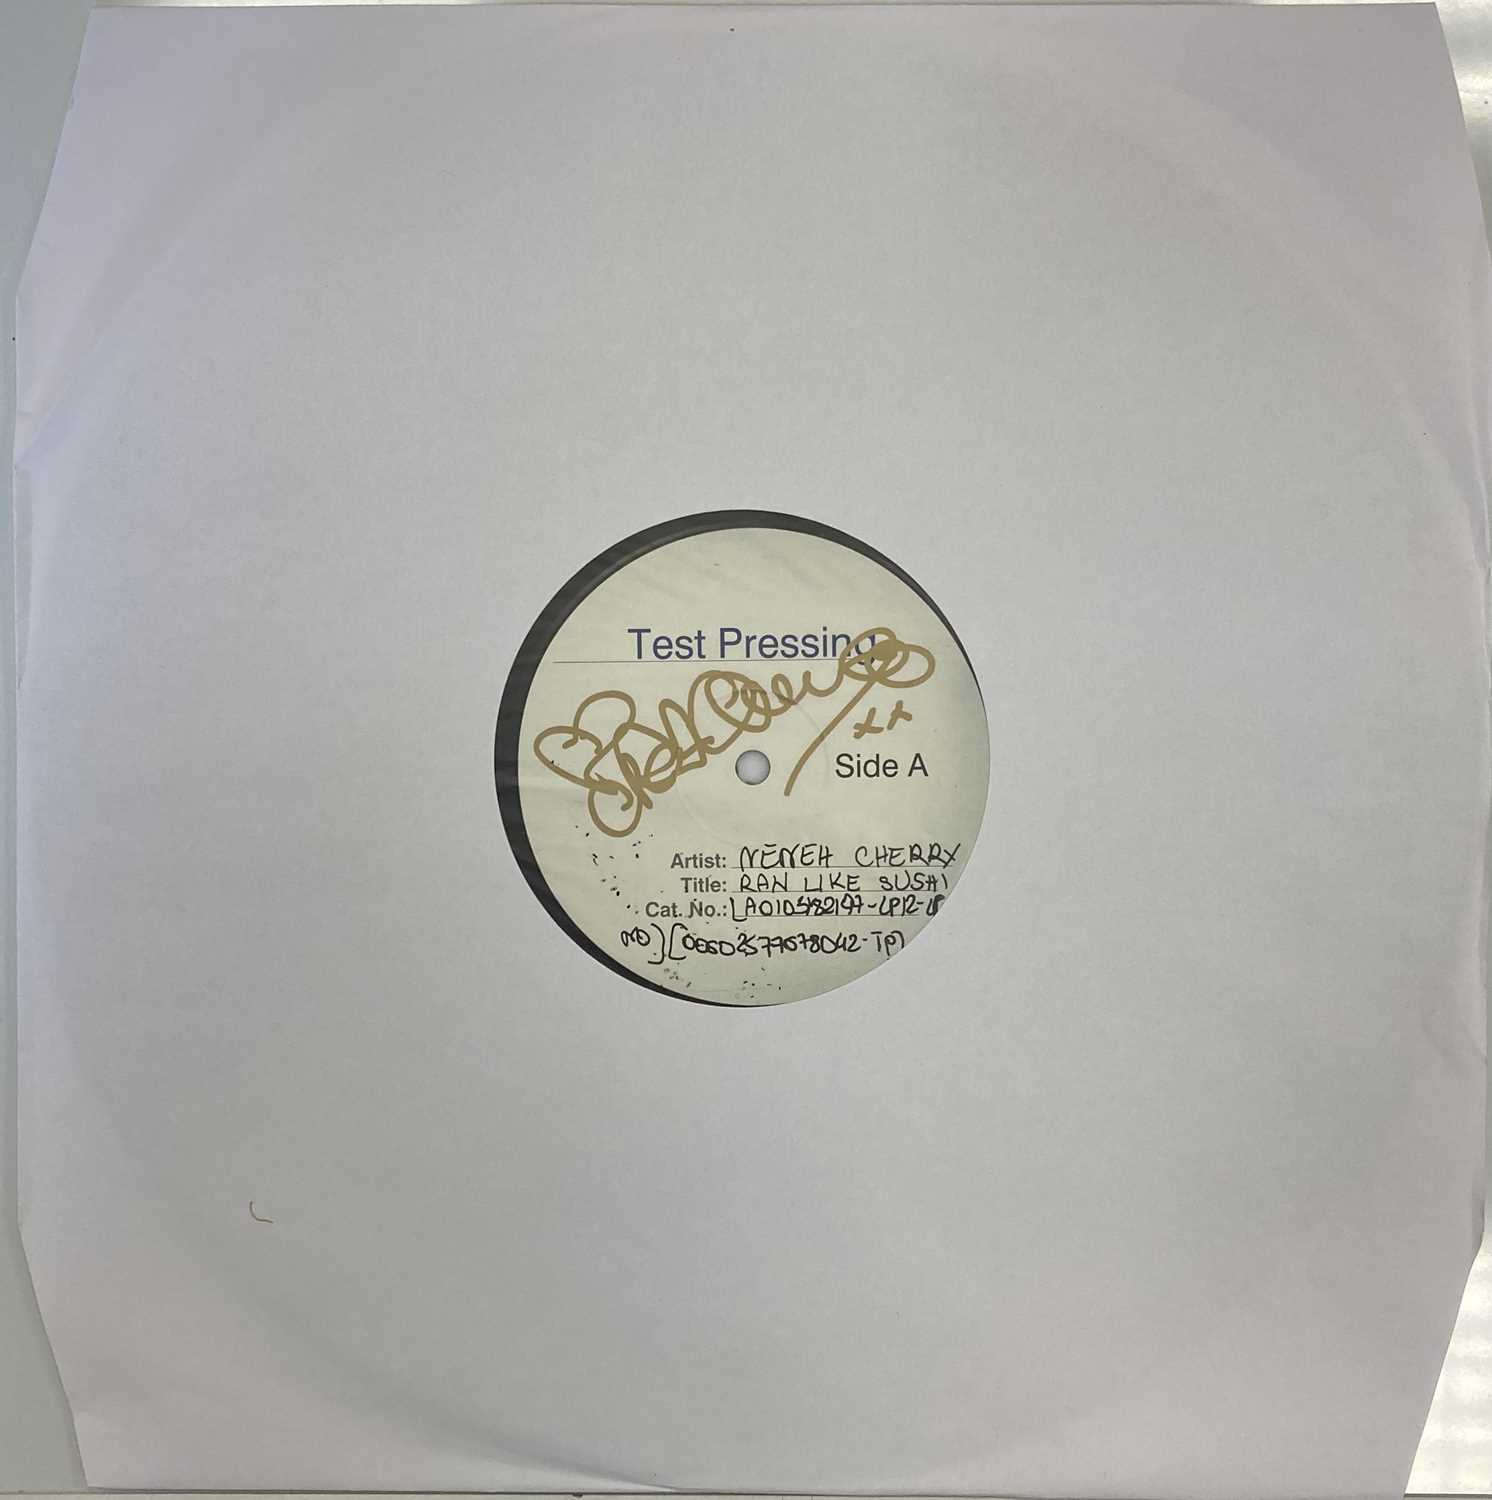 Lot 112 - NENEH CHERRY SIGNED WHITE LABEL TEST PRESSING.